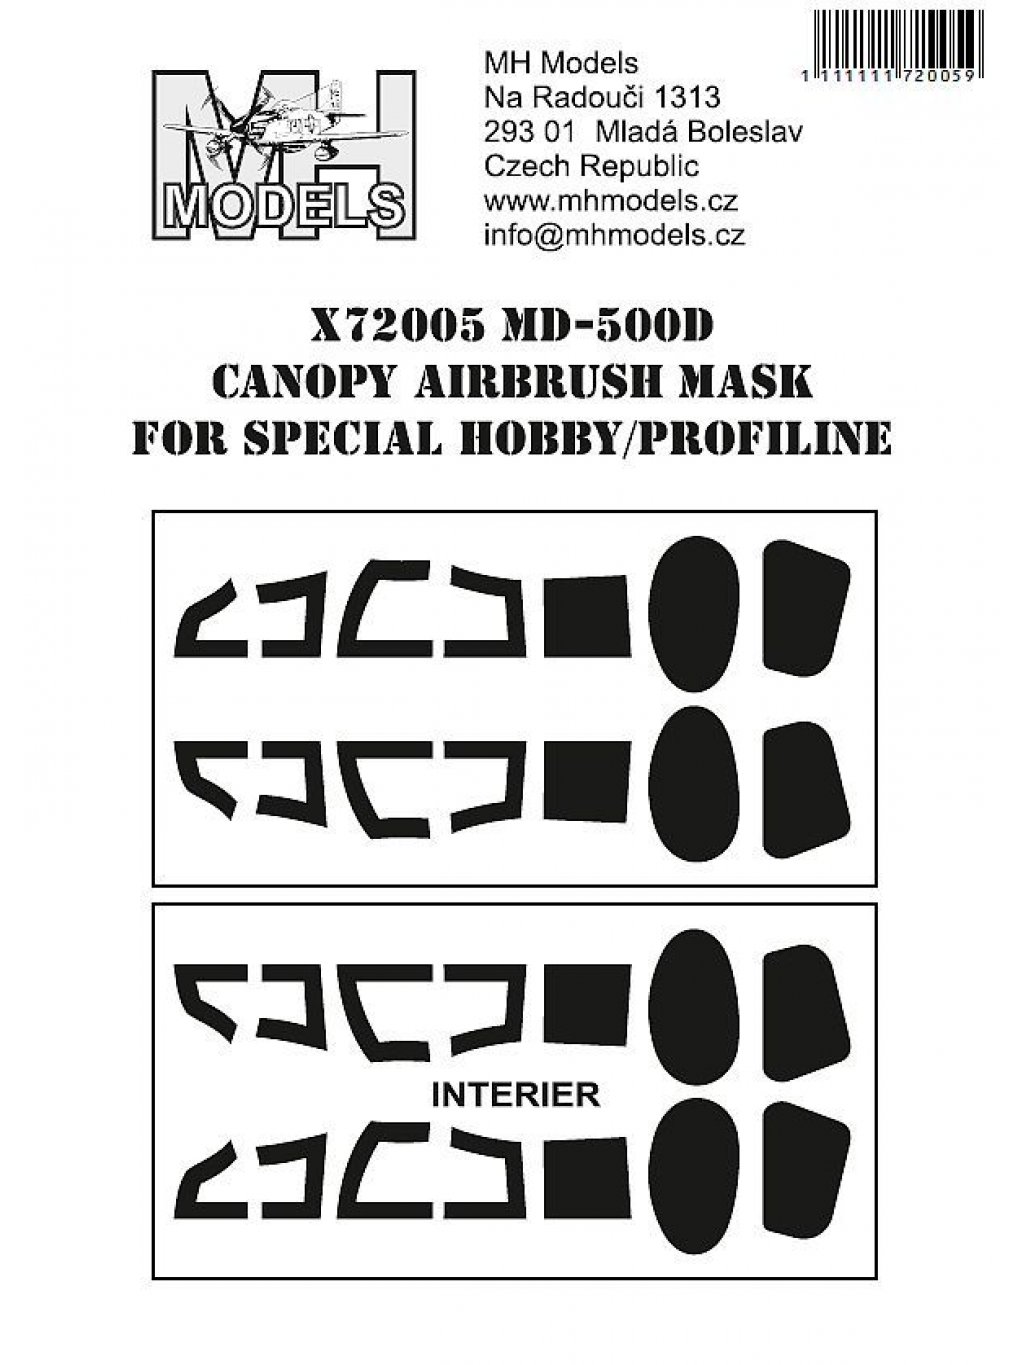 MD-500D Canopy Airbrush Mask for Special Hobby / Profiline